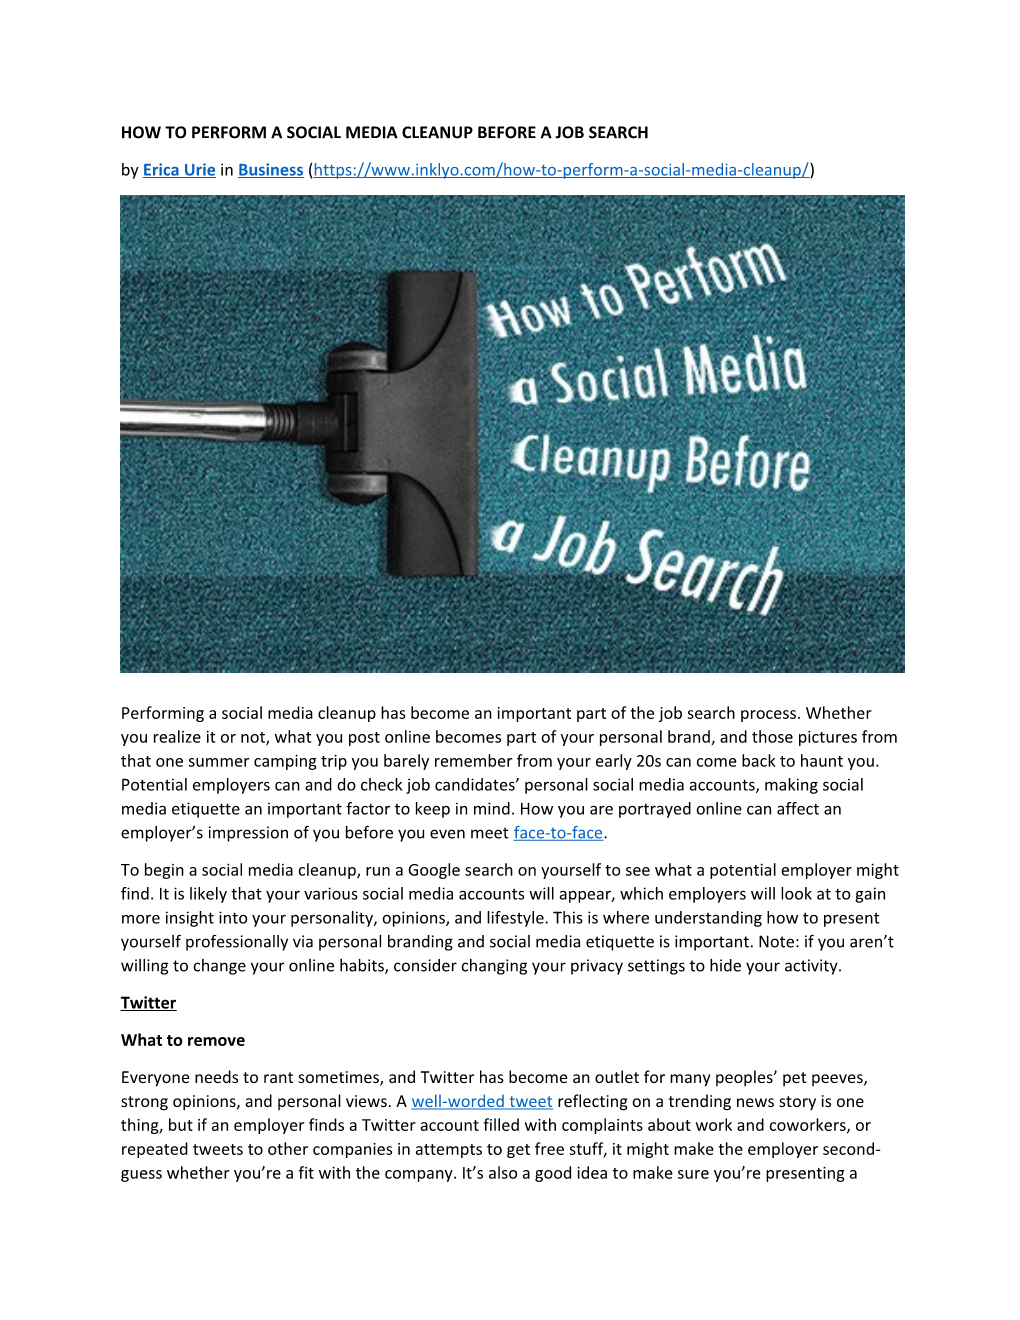 How to Perform a Social Media Cleanup Before a Job Search